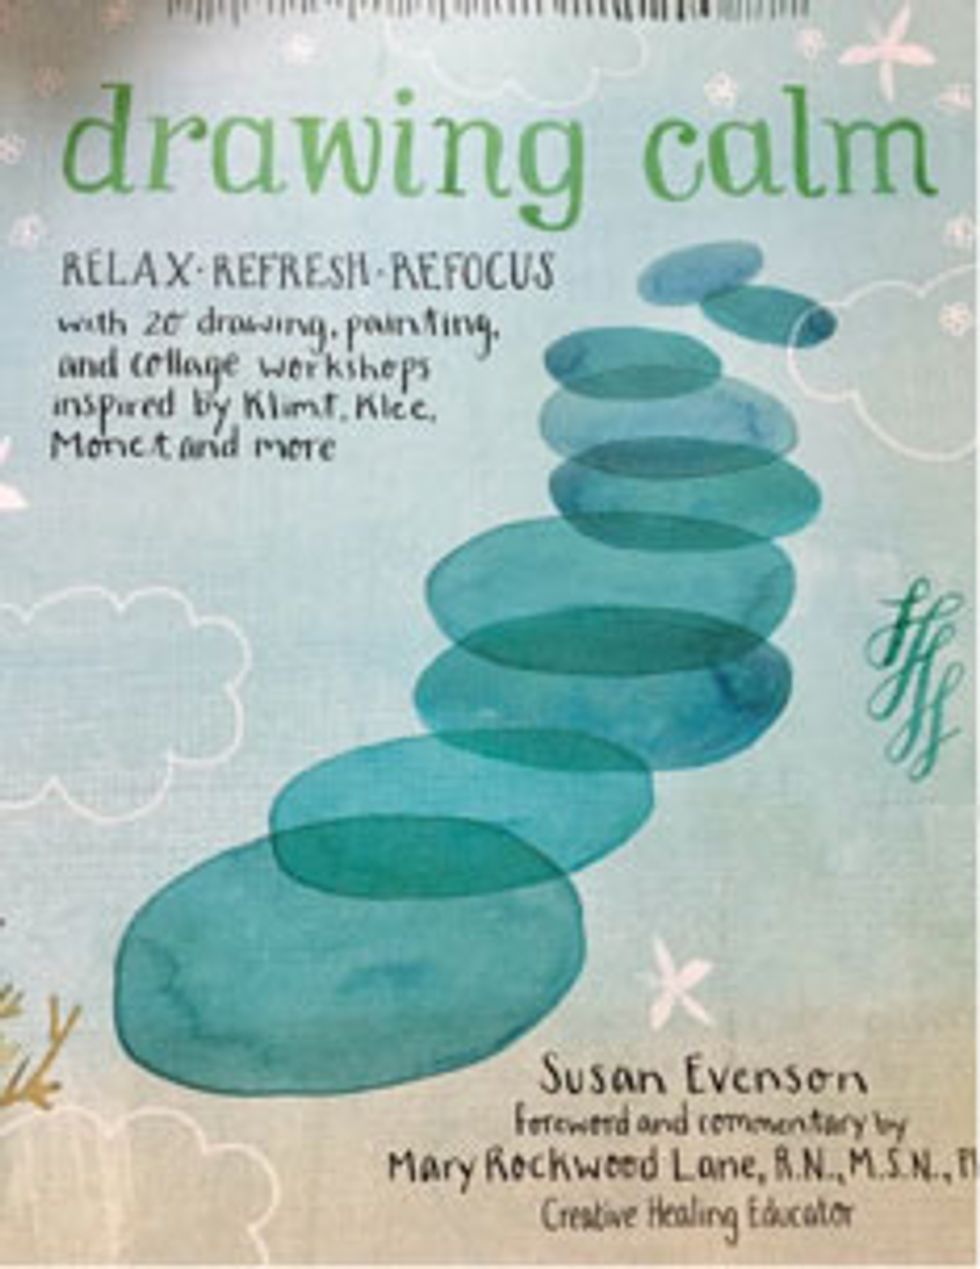 Drawing Calm book cover